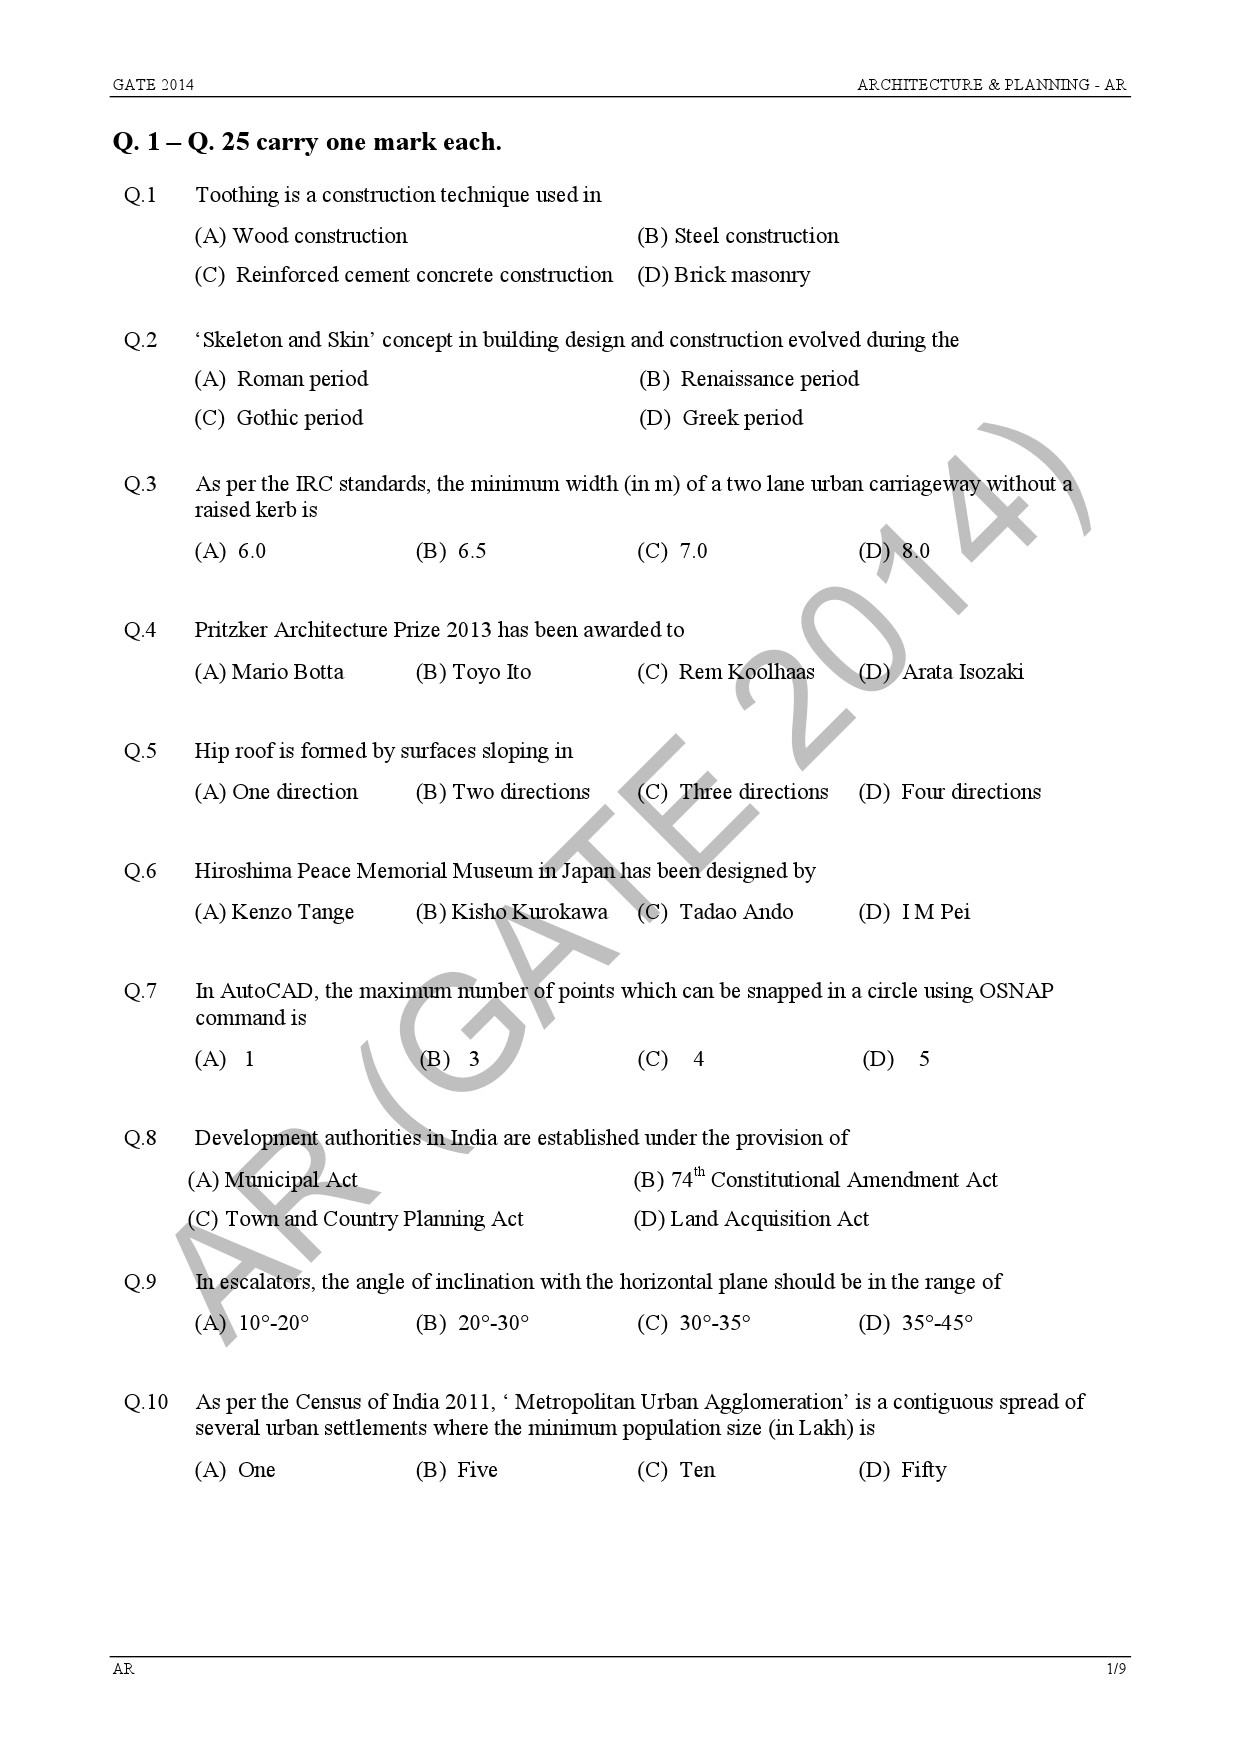 GATE Exam Question Paper 2014 Architecture and Planning 7